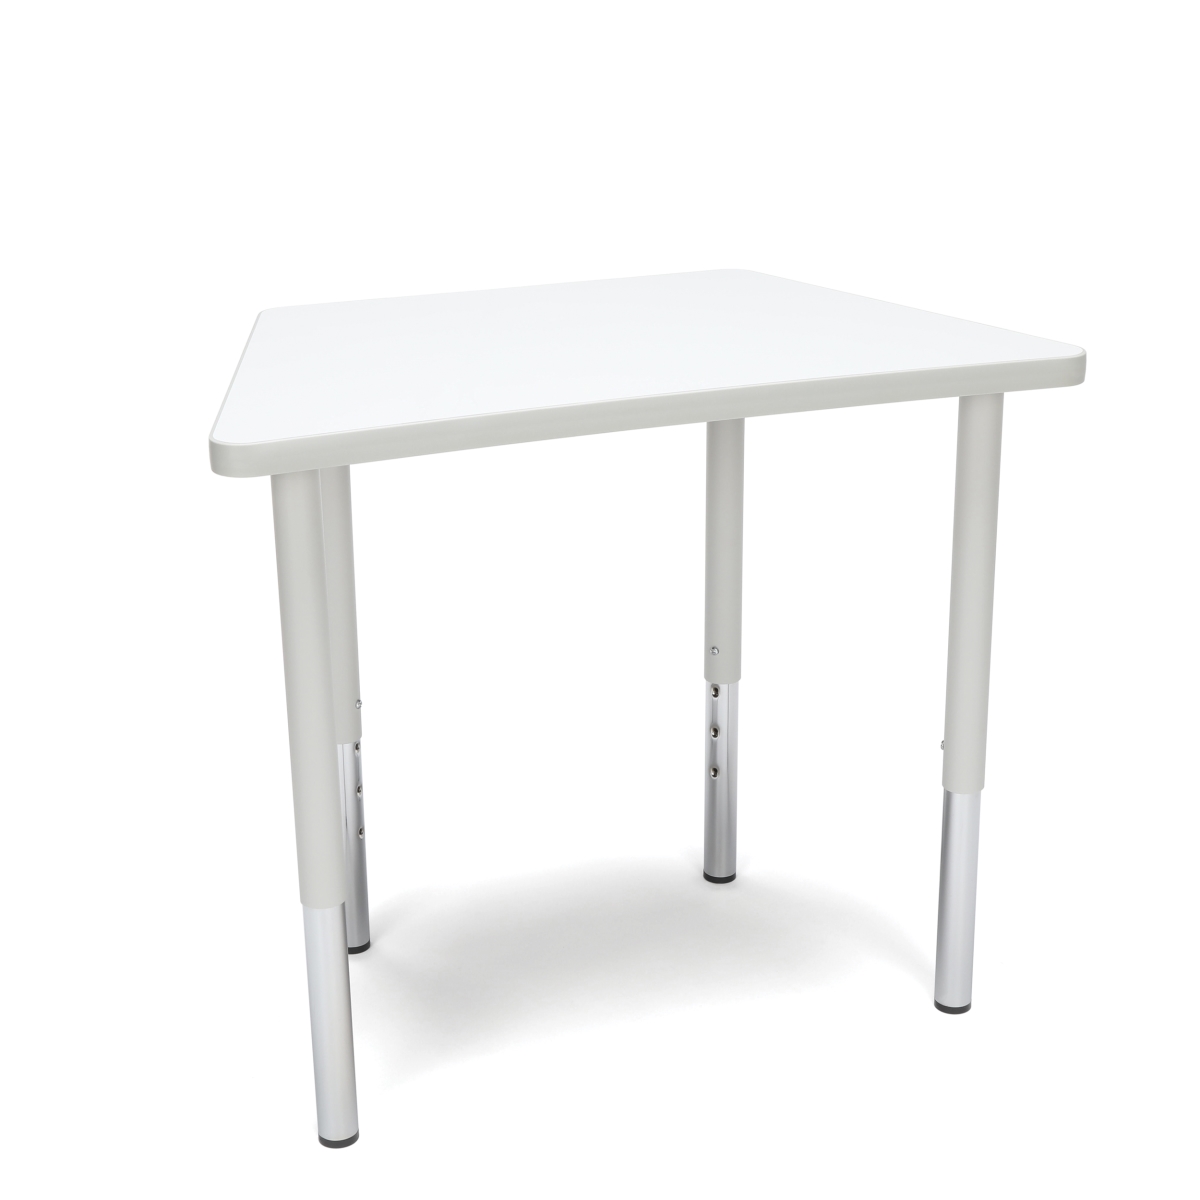 Trap-ll-wht Adapt Series Trapezoid Standard Table - 23-31 In. Height Adjustable Desk, White